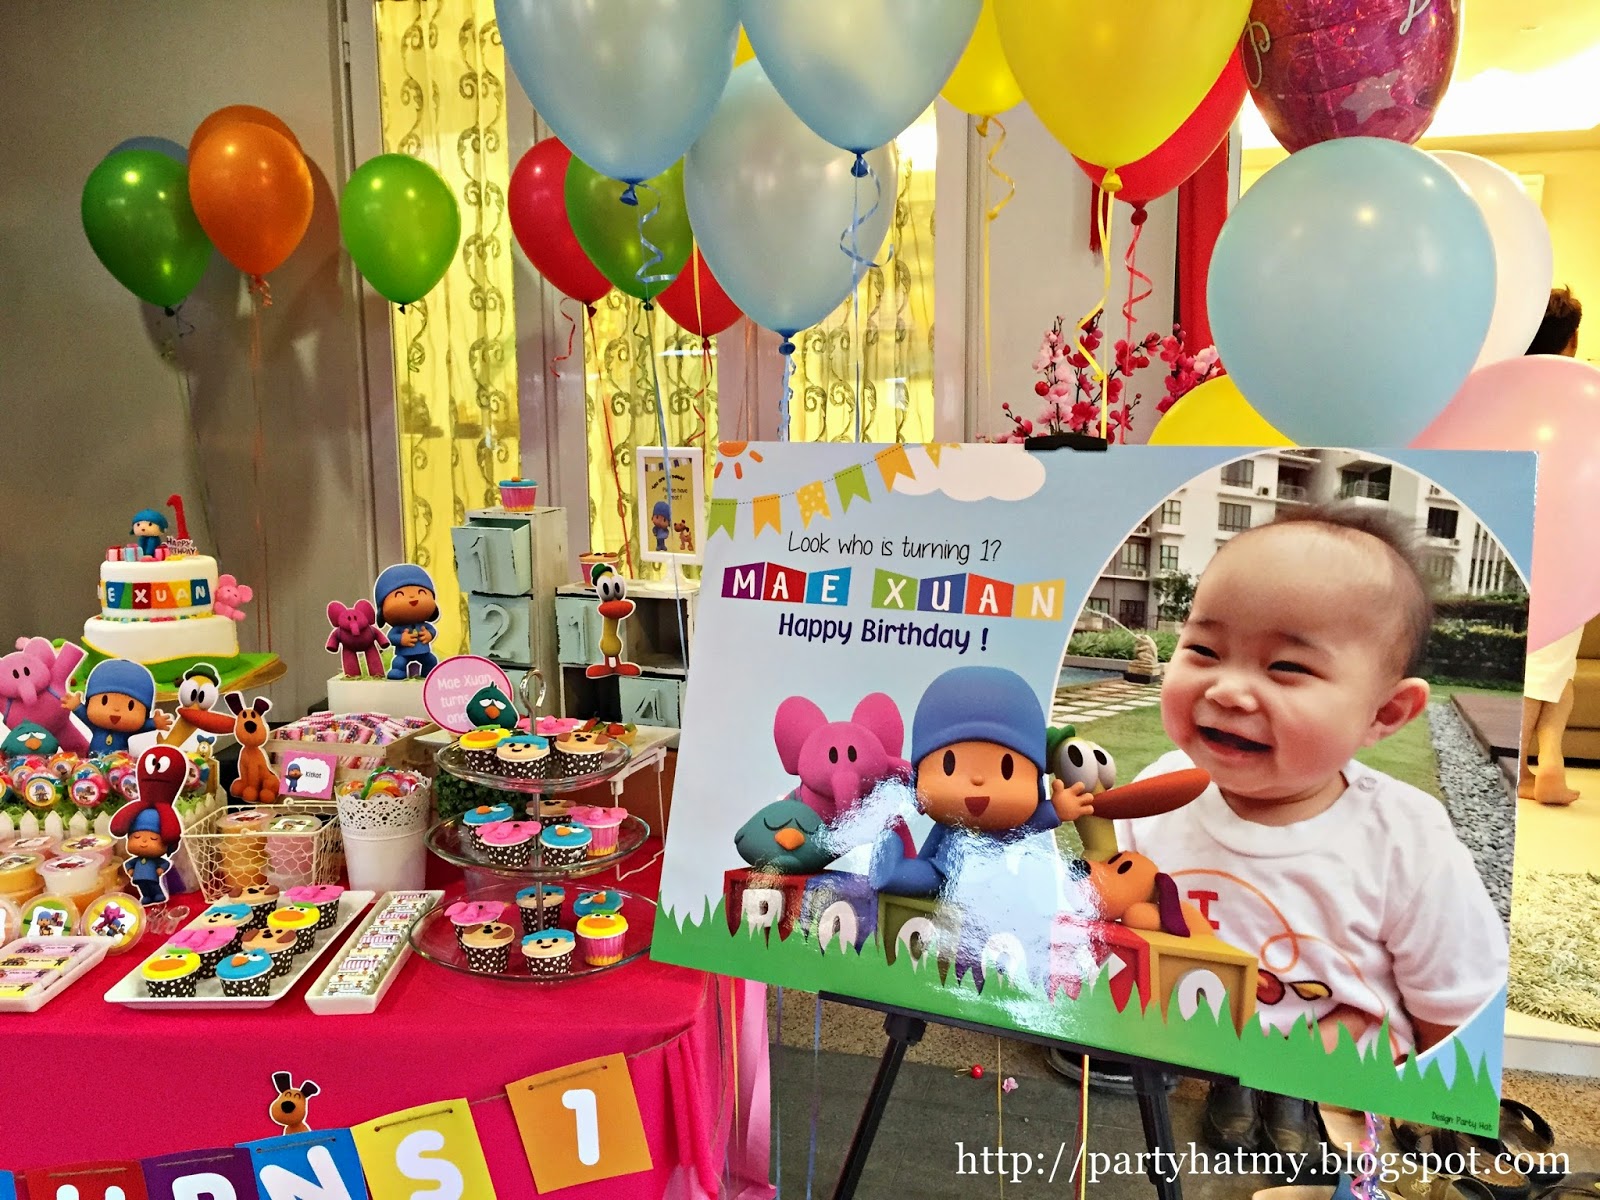 Party Hat: Pocoyo Birthday Party for Mae Xuan